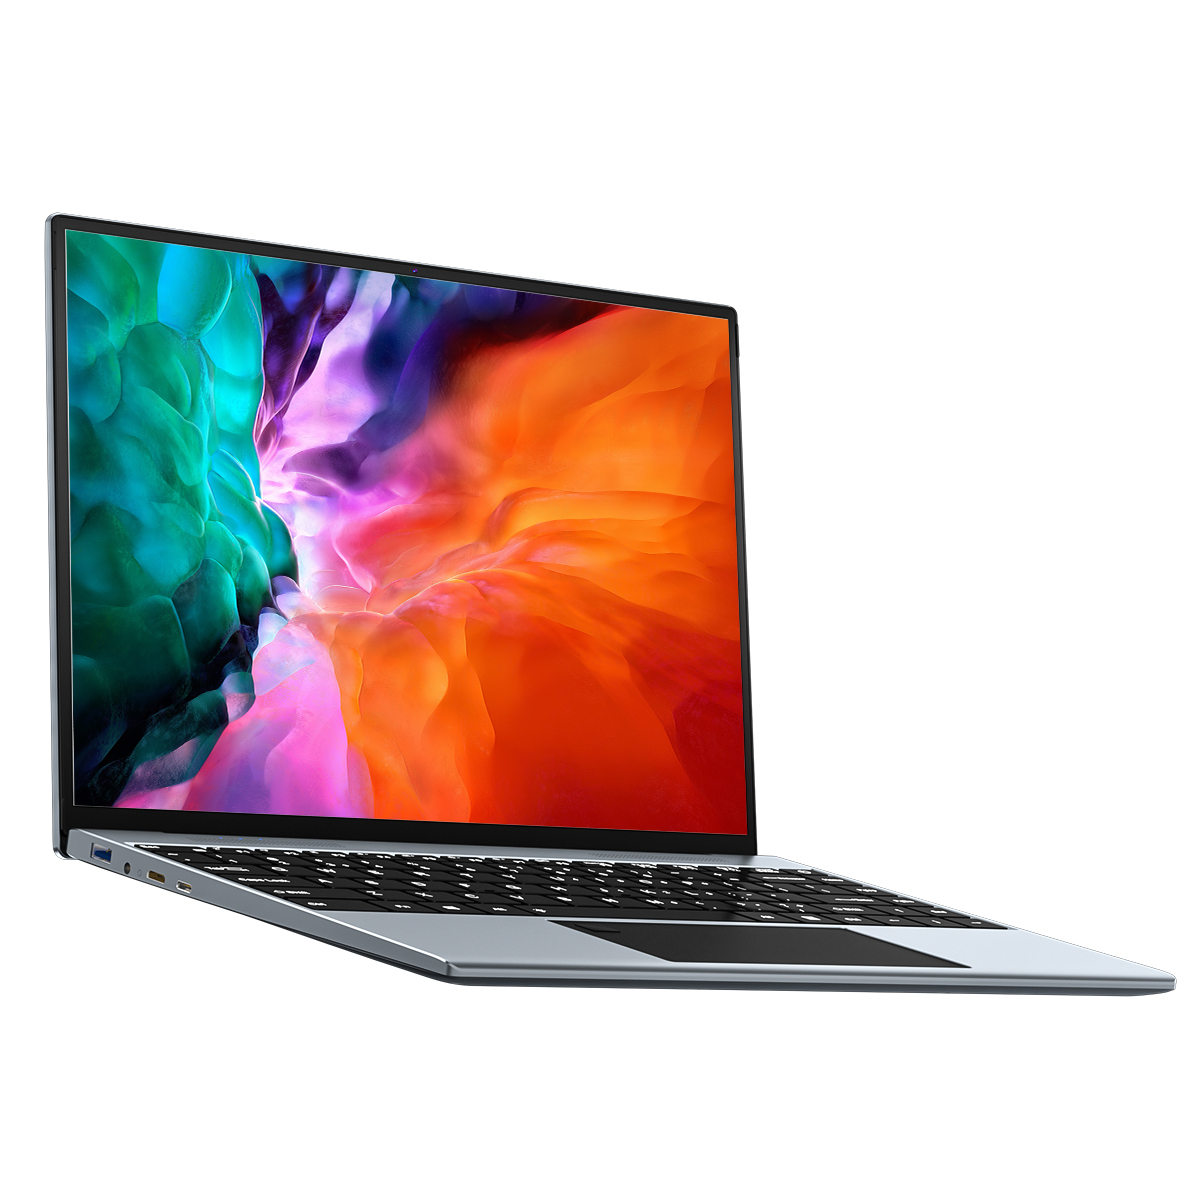 Find EU Direct KUU YoBook Pro Laptop 13 5 inch 3000 x 2000 3 2 100 sRGB Full View Screen Intel N4120 8GB RAM 256GB SSD 38Wh Battery 1 2KG Lightweight Type C Backlit Windows10 Pro Notebook for Sale on Gipsybee.com with cryptocurrencies